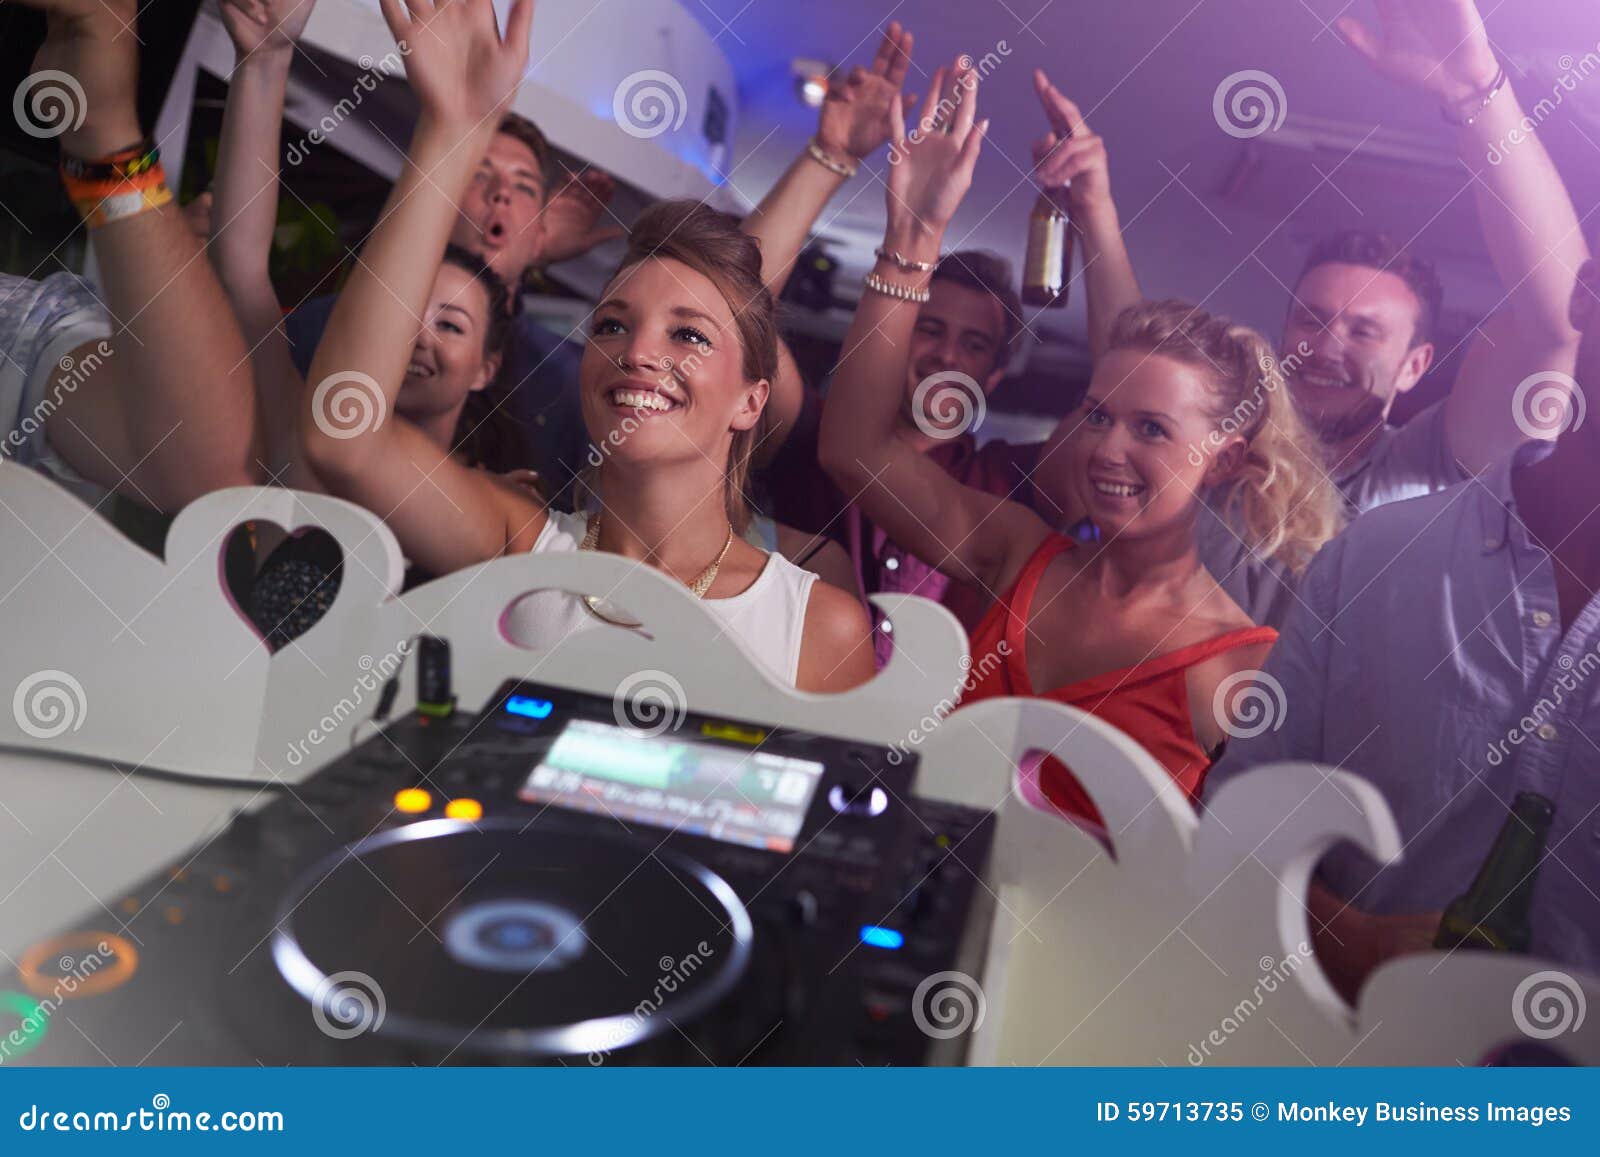 People Dancing in Nightclub with DJ in Foreground Stock Image - Image ...